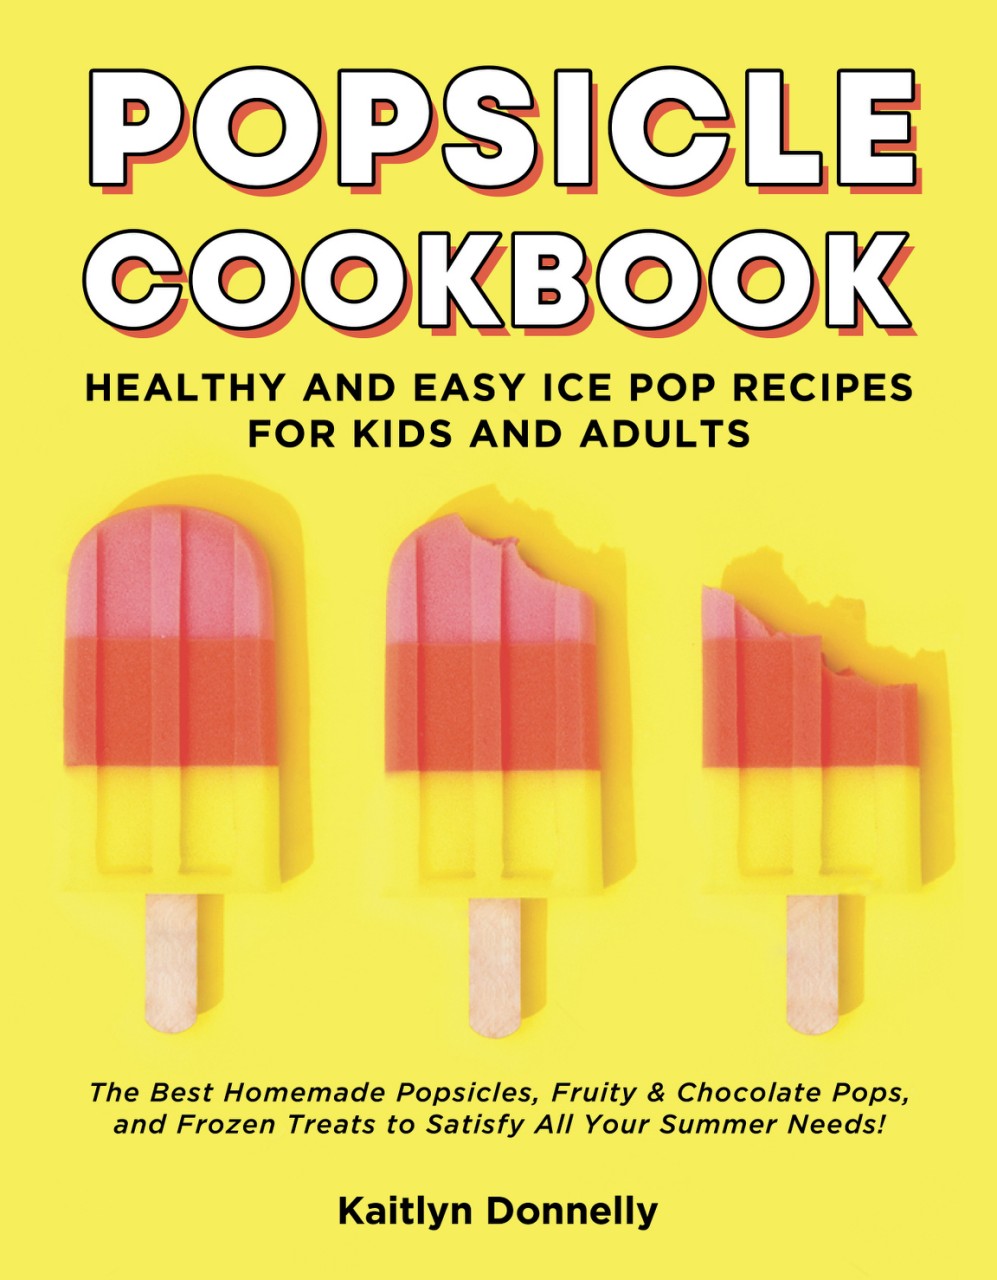 FREE: Popsicle Cookbook: Healthy and Easy Ice Pop Recipes for Kids and Adults. by Kaitlyn Donnelly